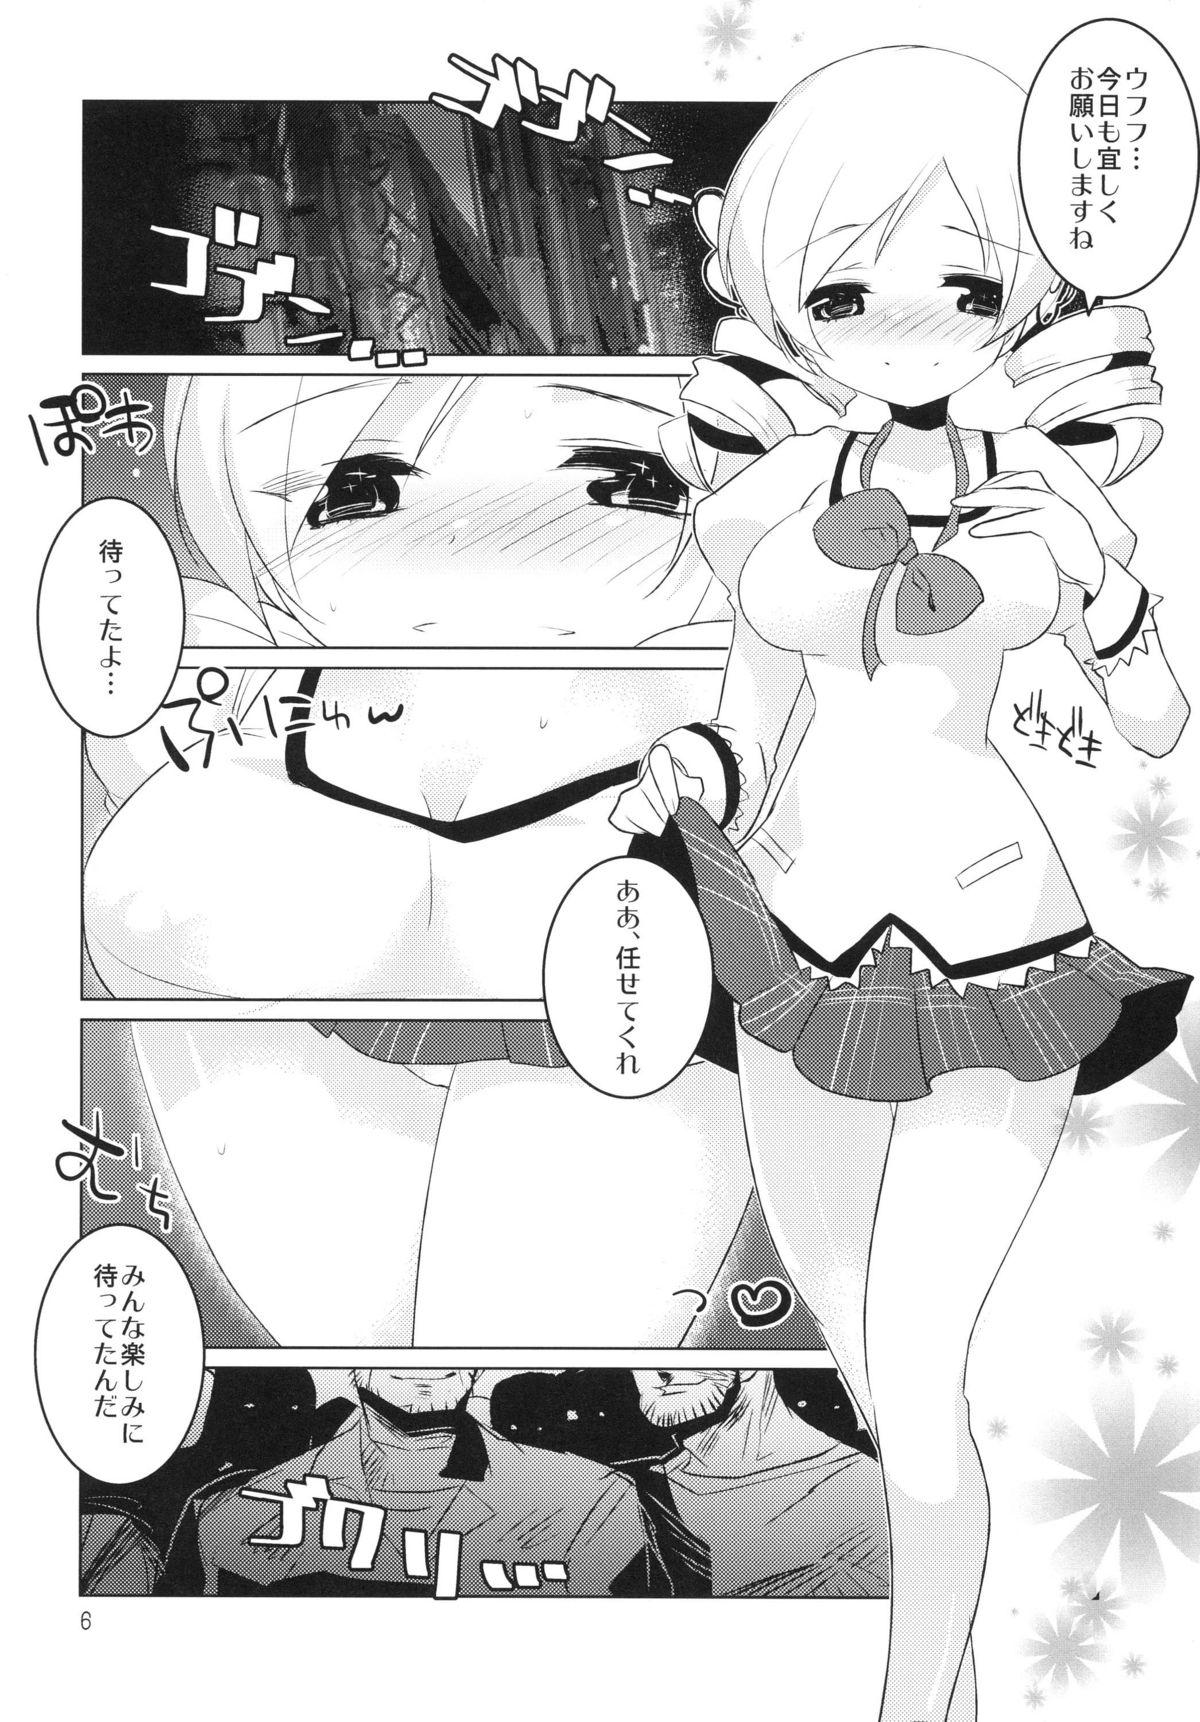 Blondes All I Need Is Love - Puella magi madoka magica Pussyfucking - Page 6